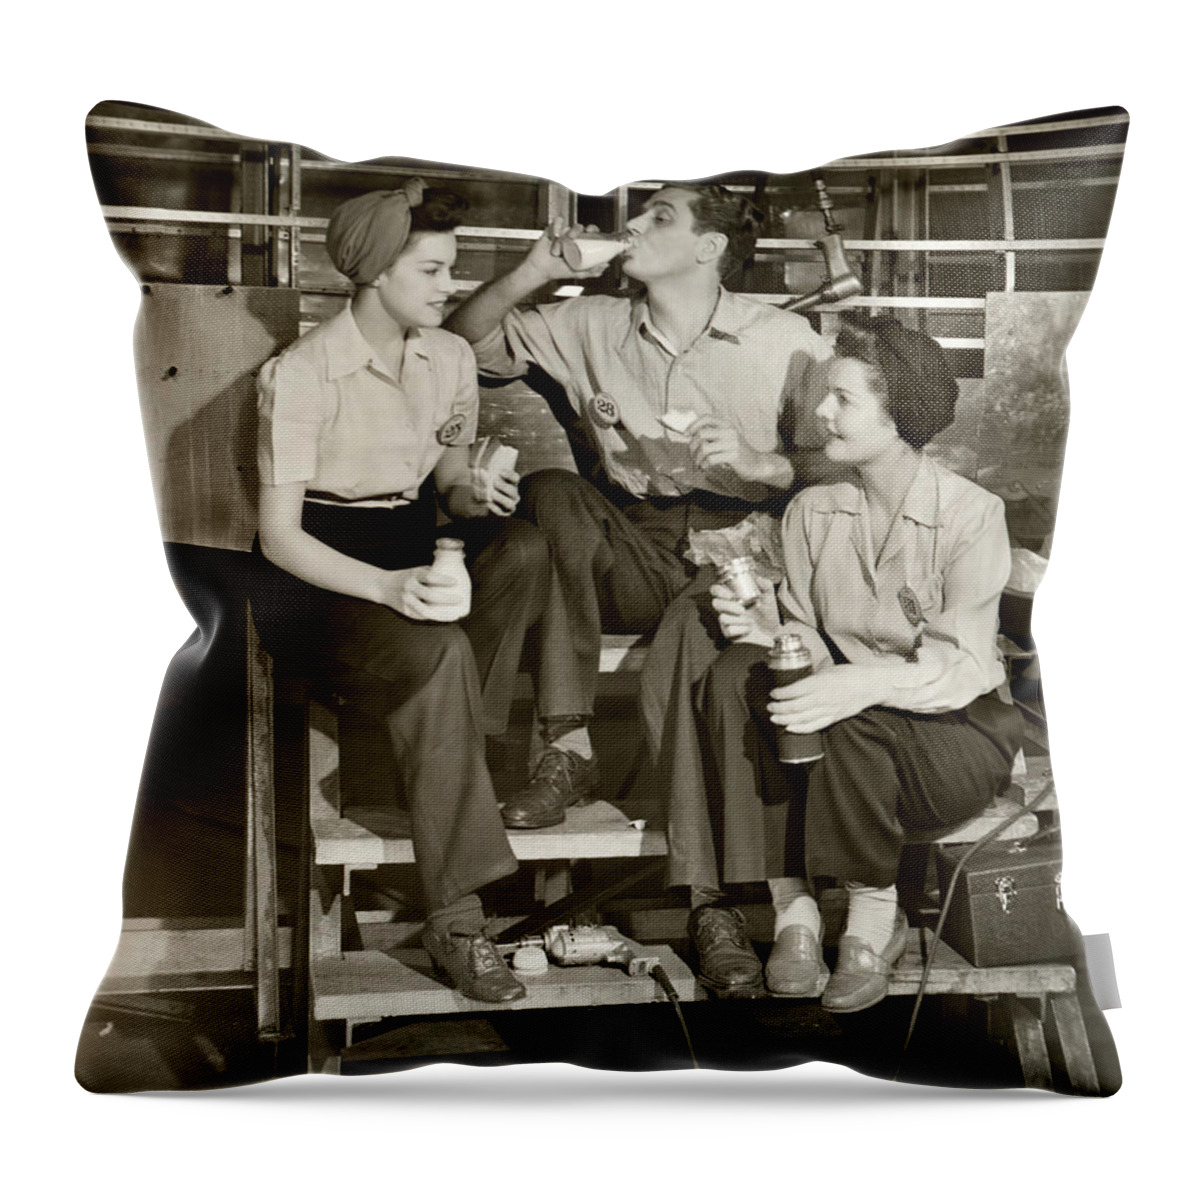 Working Throw Pillow featuring the photograph Ww II Aircraft Workers Having Lunch by George Marks